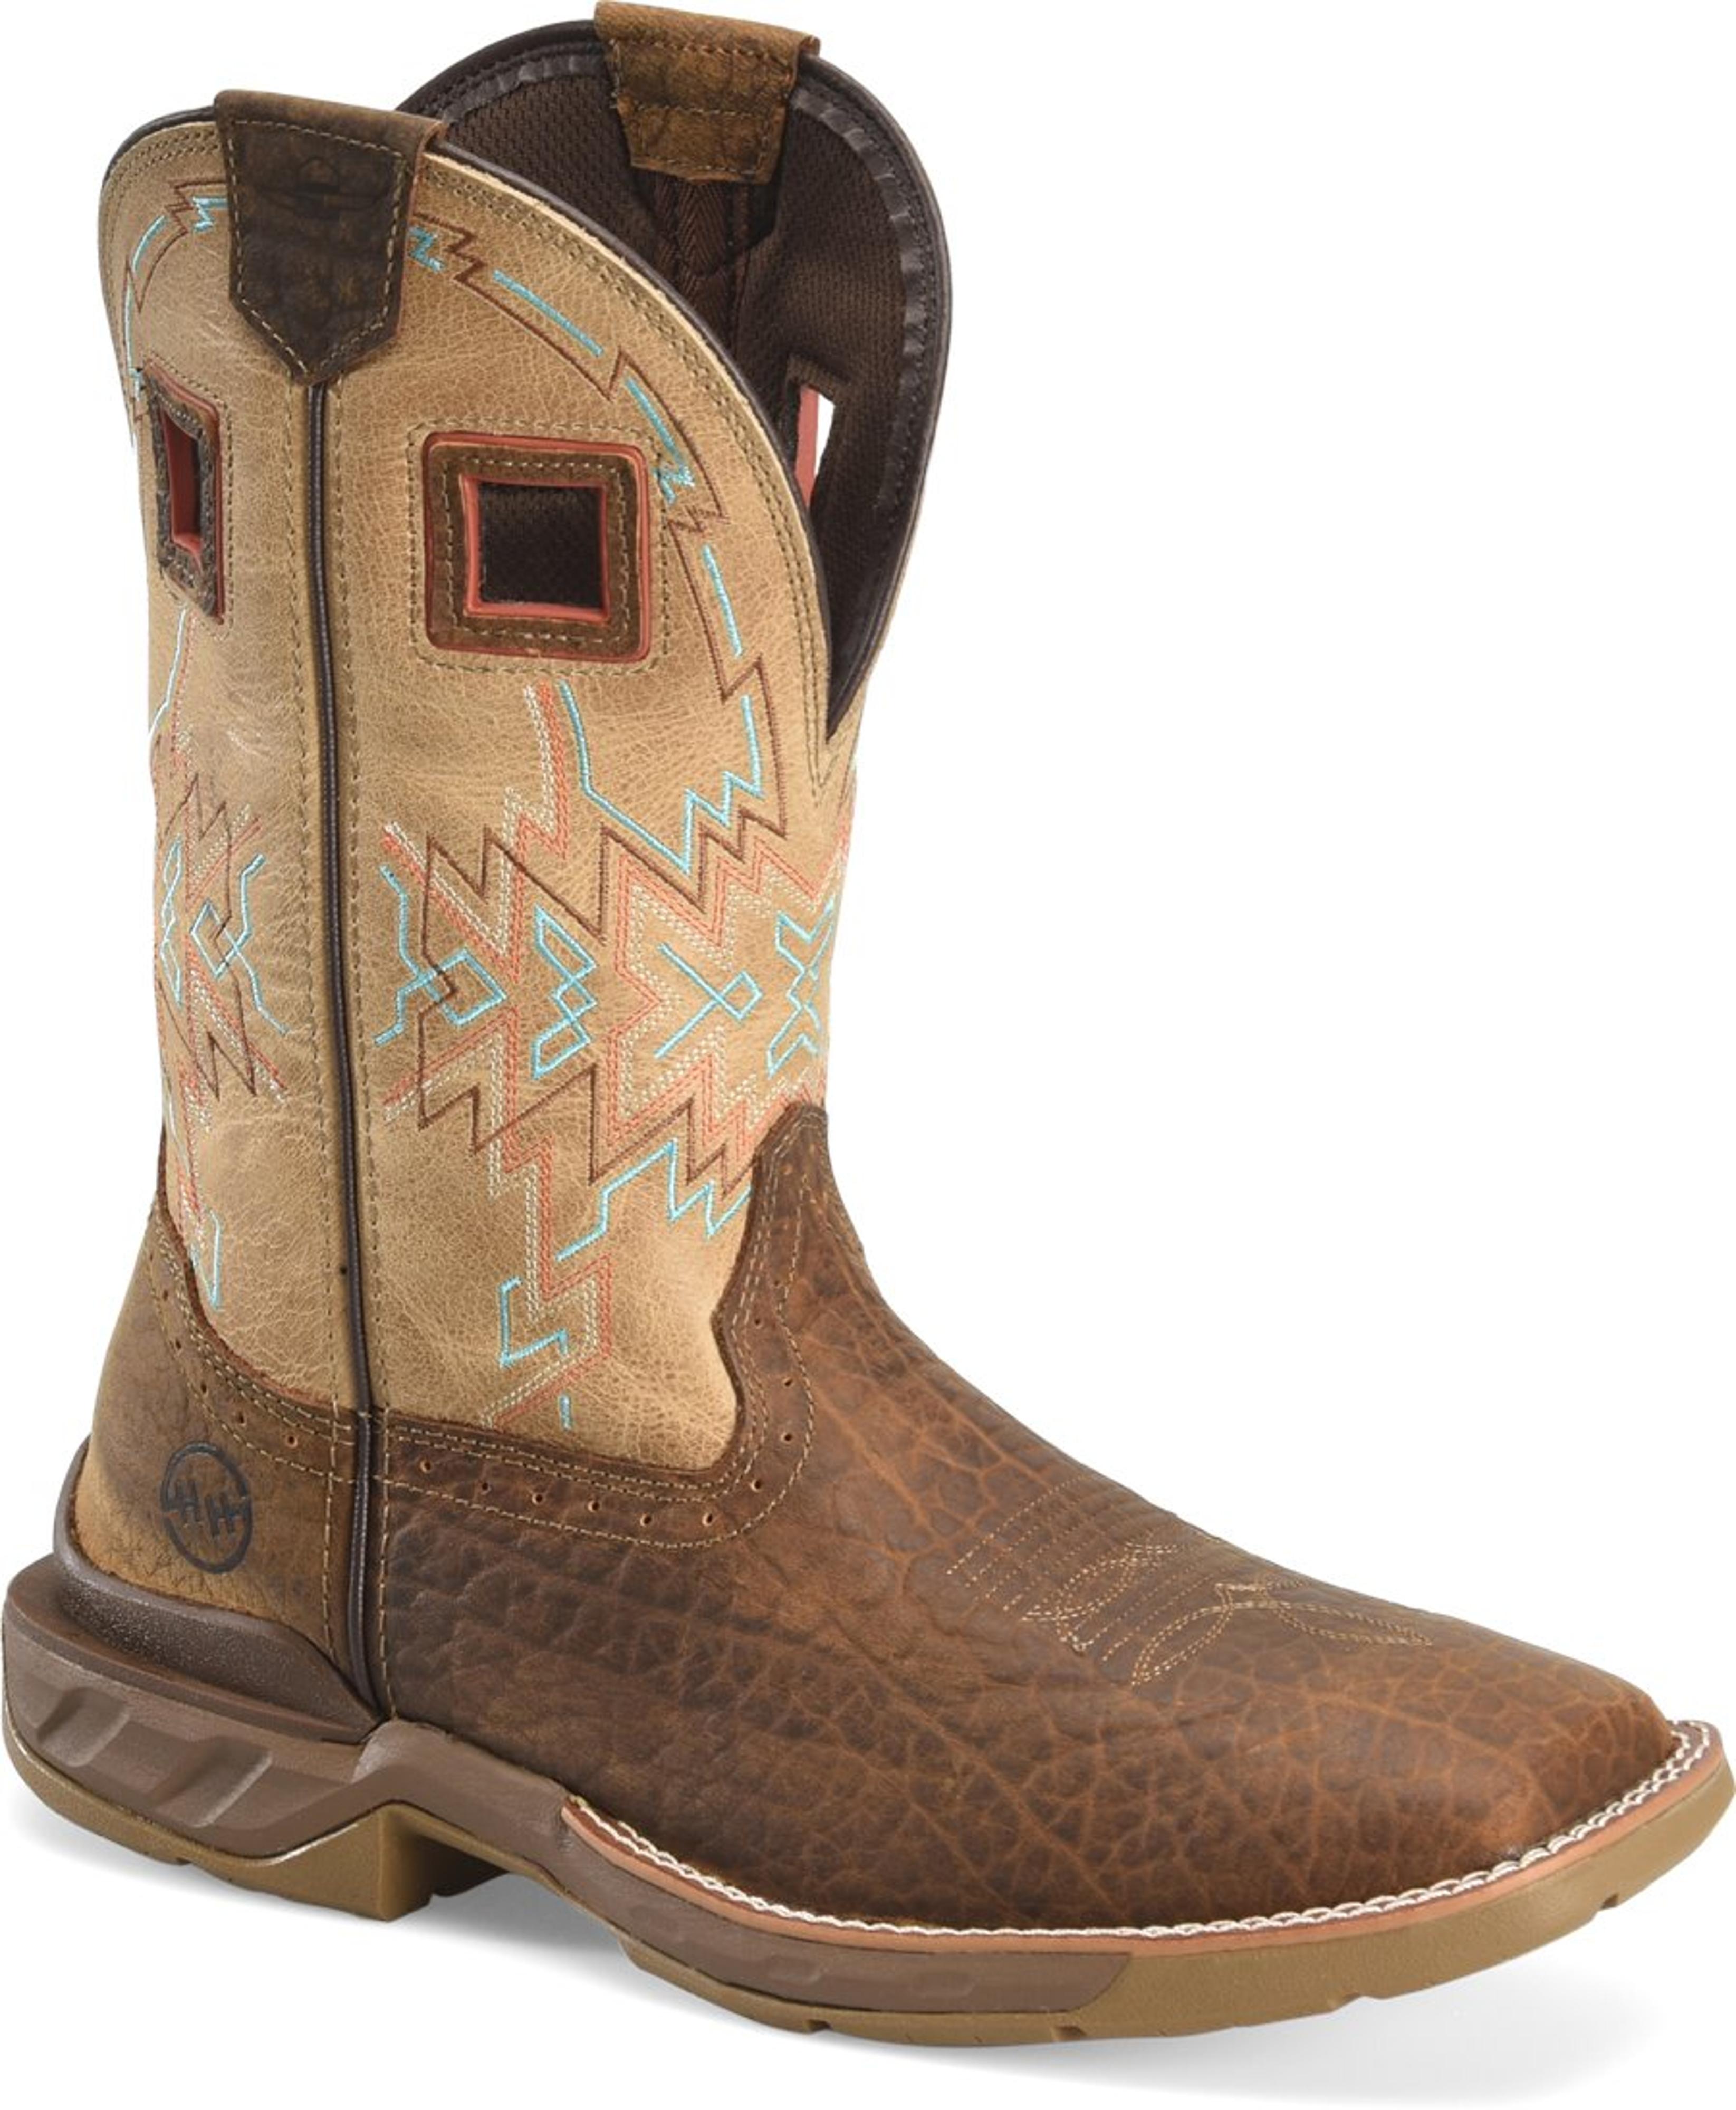  Double H Clem Work Boot